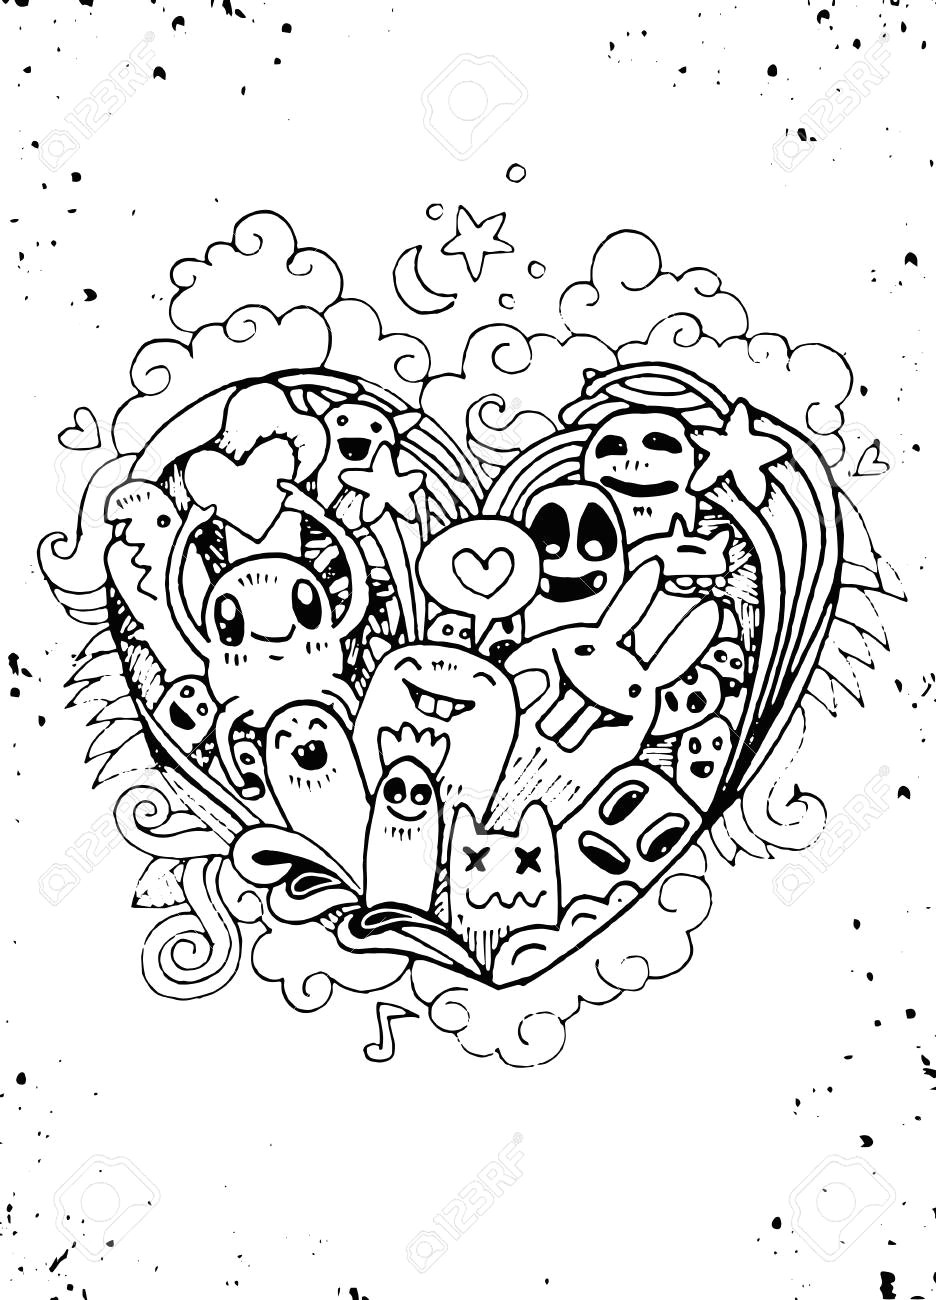 Line Drawing Of A Heart Shape Doodle Heart Shape and Doodles Monsters Sketch Vector Illustration